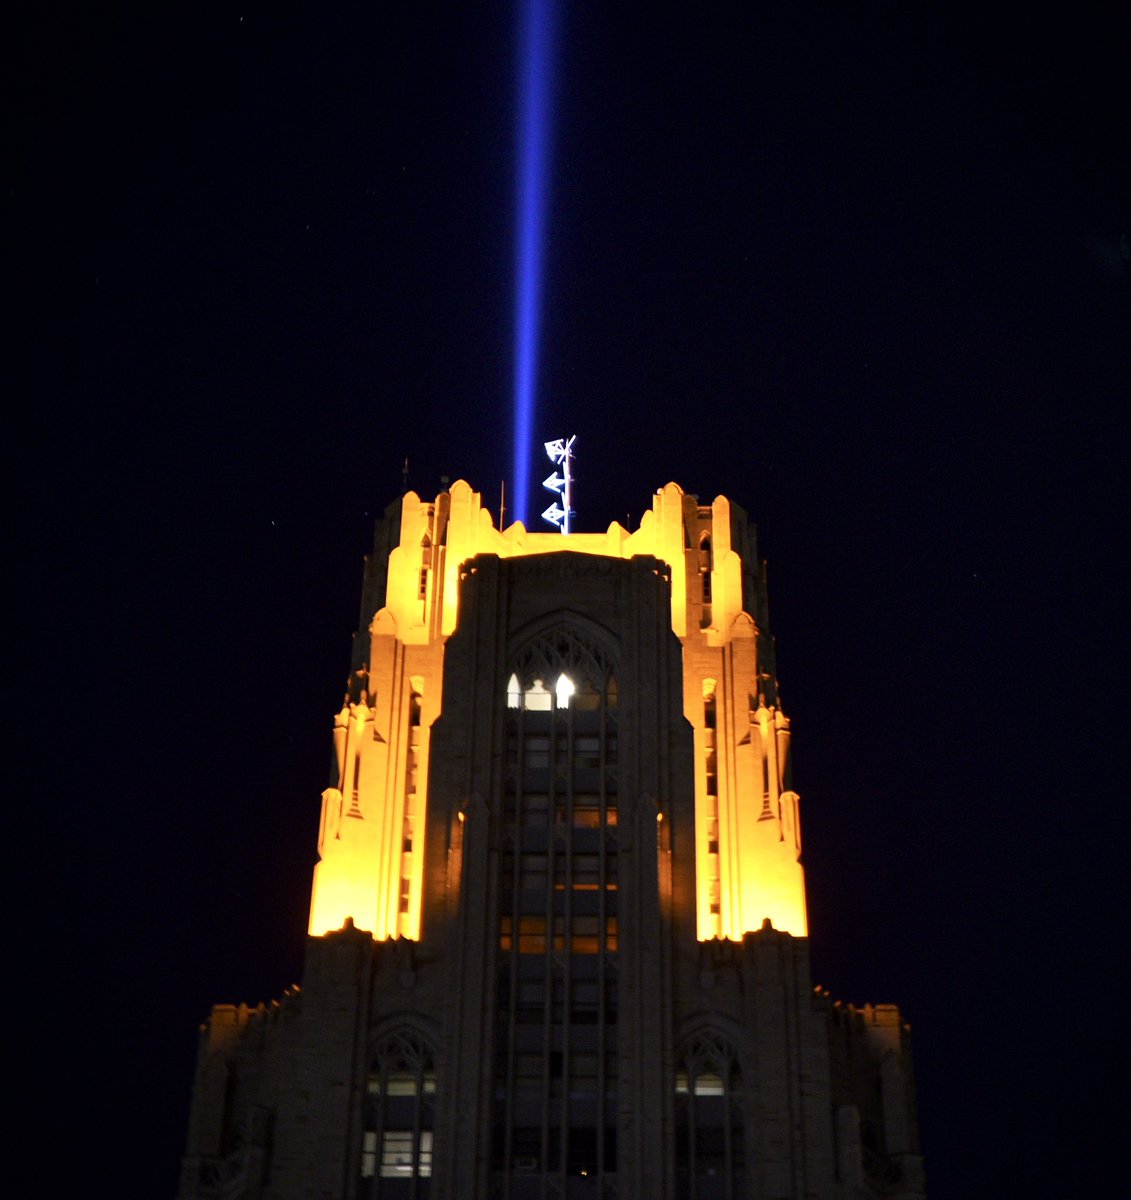 Football on Twitter: "VICTORY LIGHTS ✨ Light 'em up and let 'em know! 🗣 Pitt is 3-0 in the ACC 🔥 #H2P » #WeNotMe / Twitter